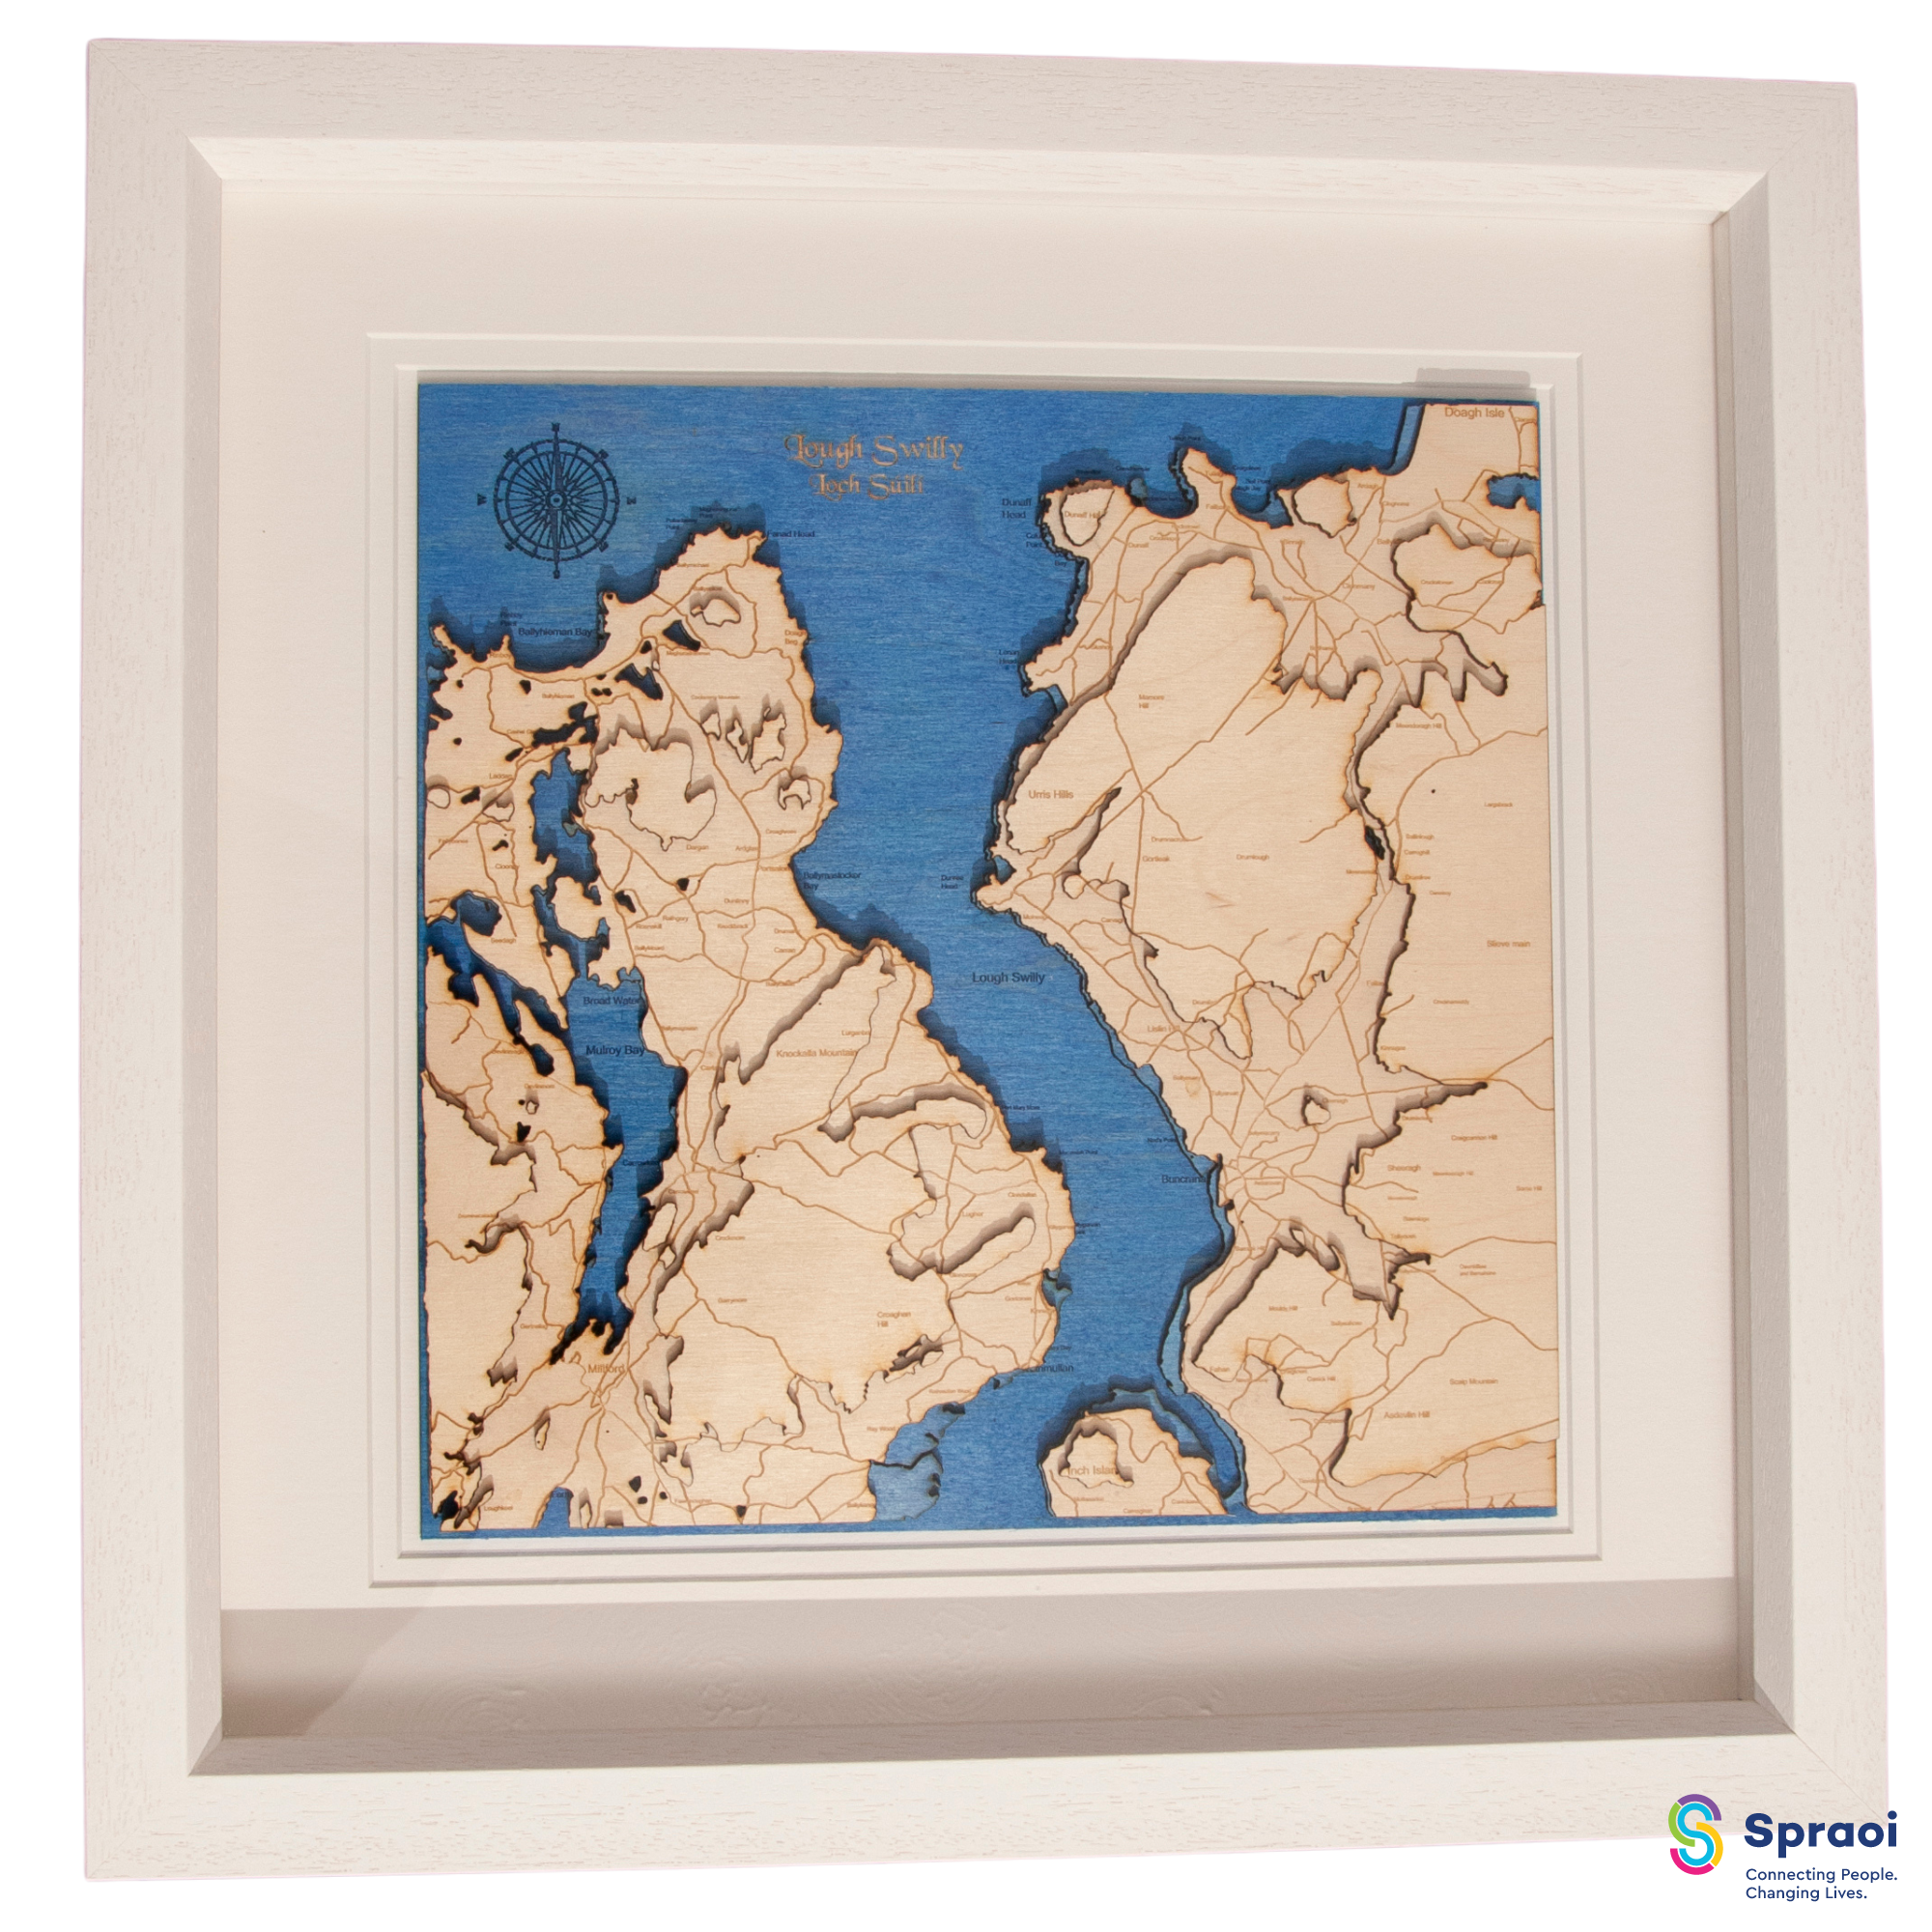 Heart of Inishowen Map - Lough Swilly